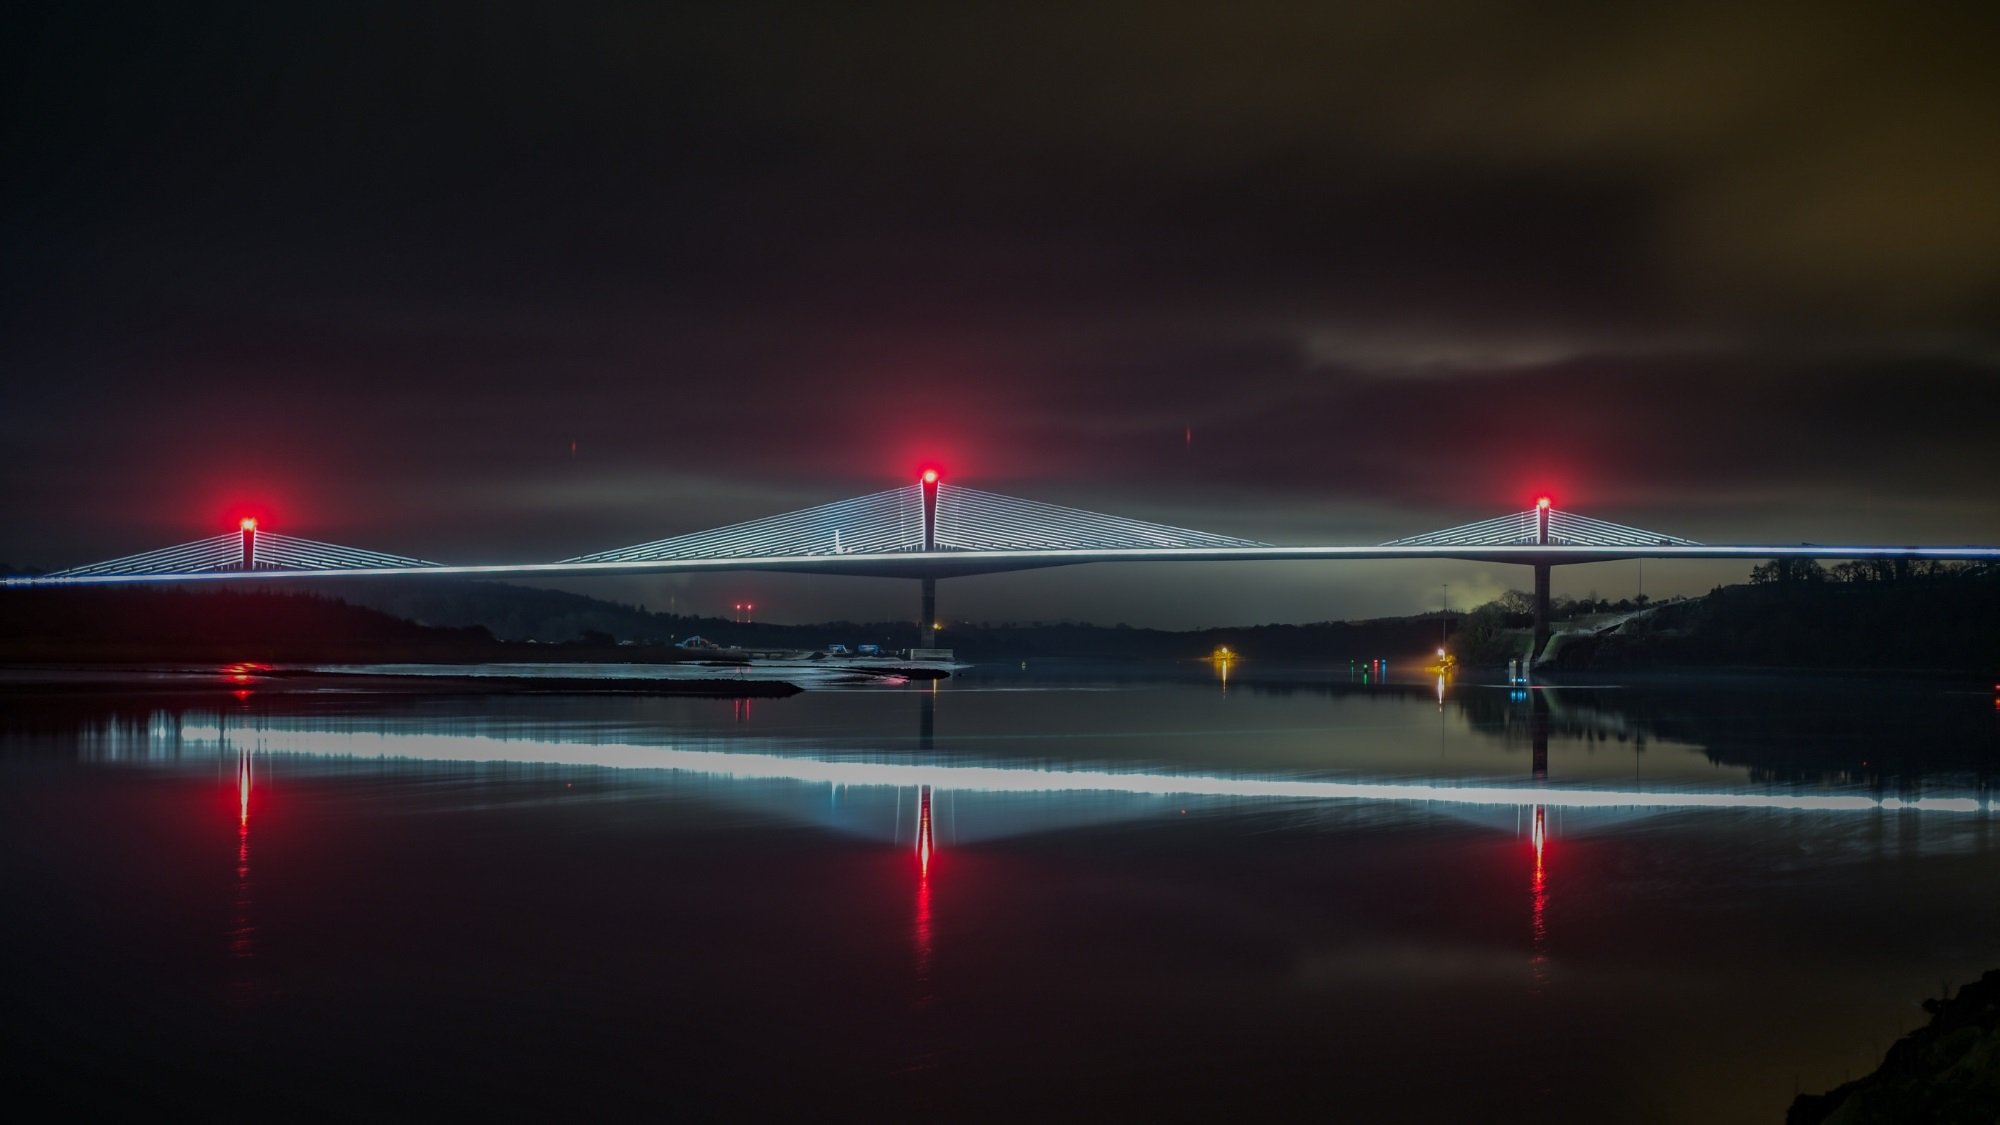 View of the Rose Fitzgerald Kennedy Bridge lit-up by night with the lights reflected in the water of the River Barrow.